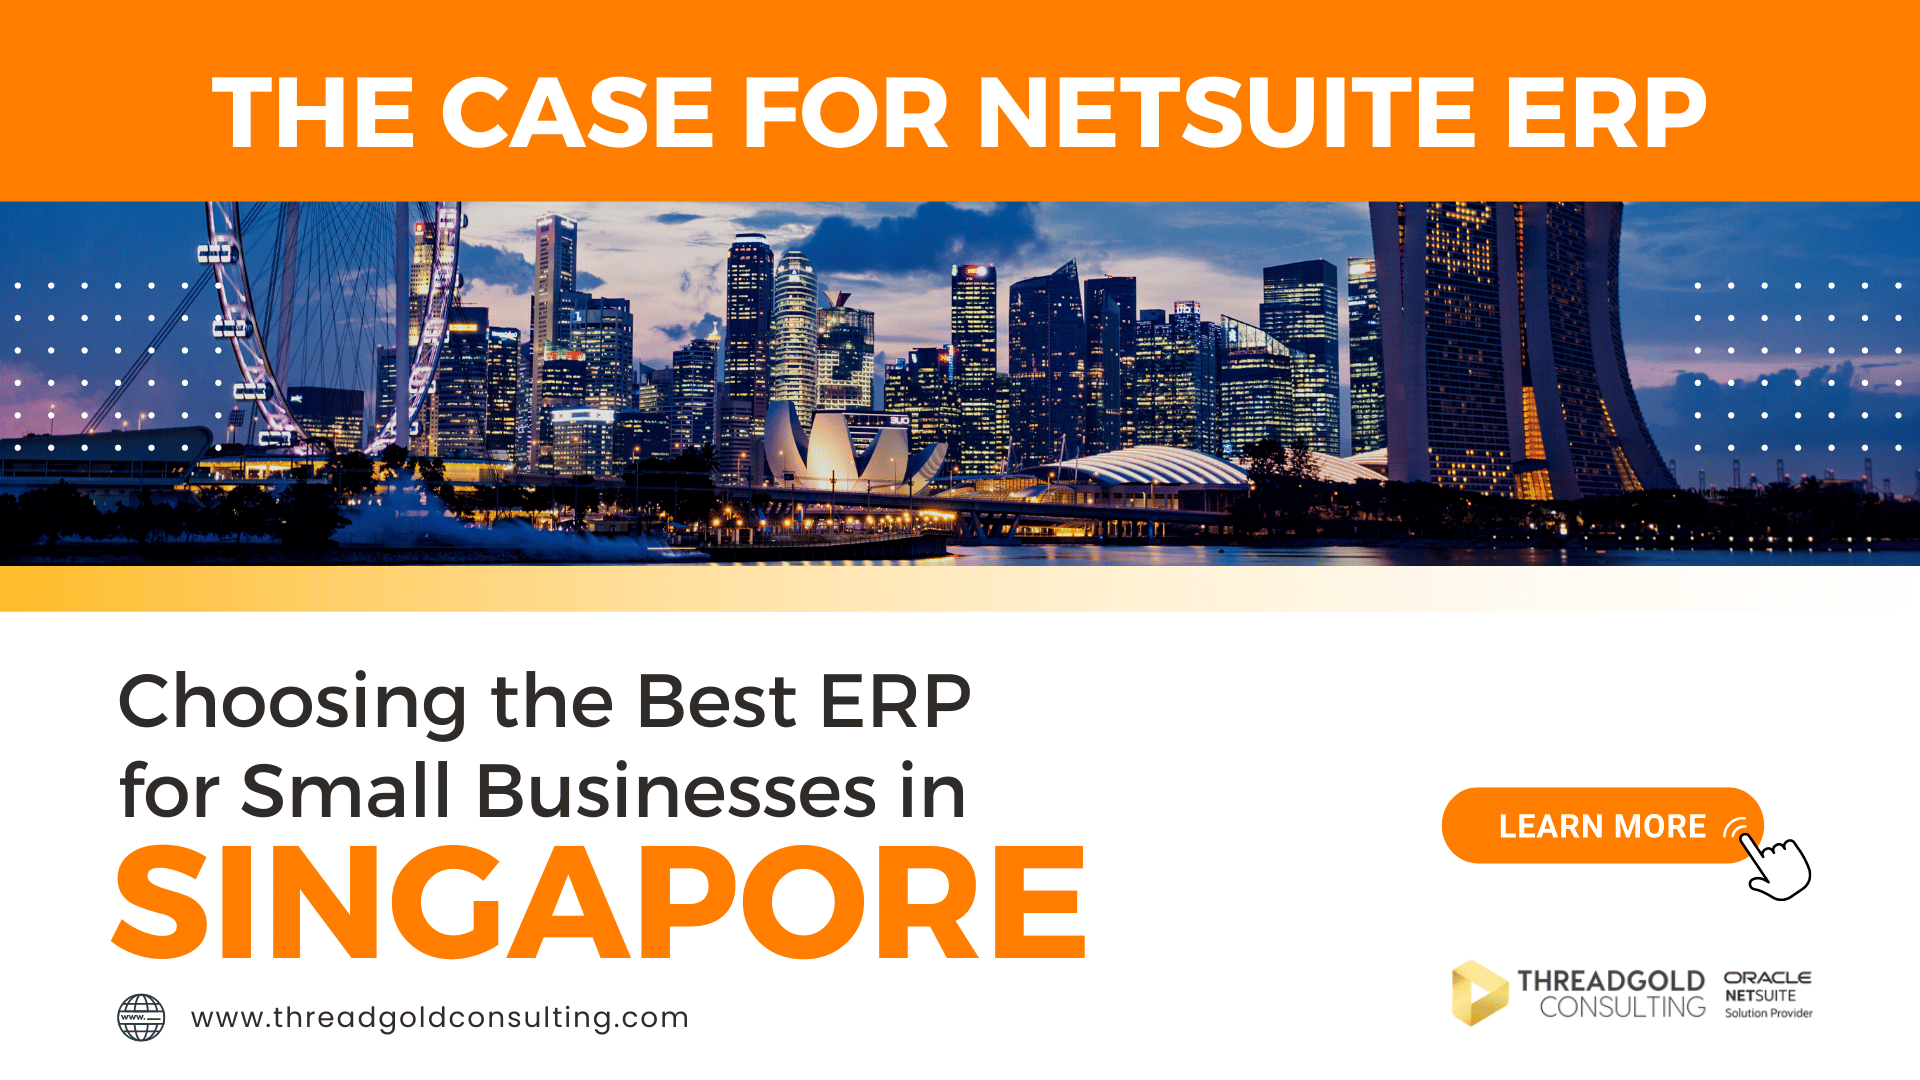 Choosing the Best ERP for Small Businesses in Singapore: The Case for NetSuite ERP